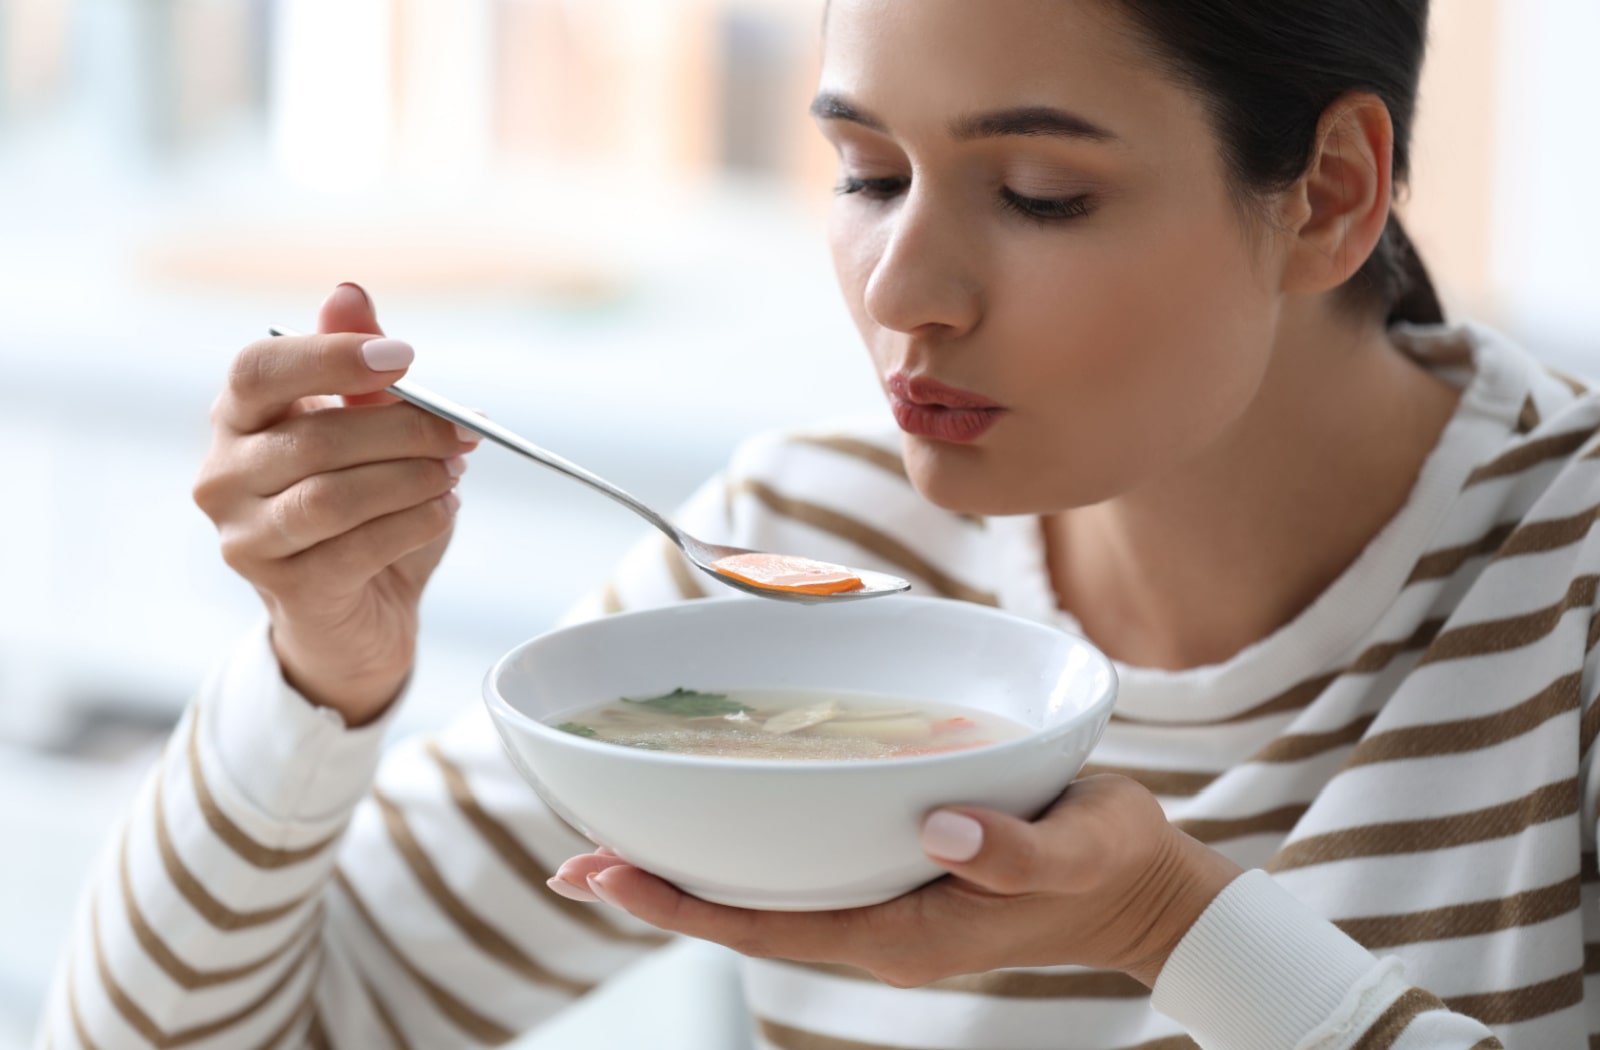 A young woman eating tasty vegetable soup after a root canal.